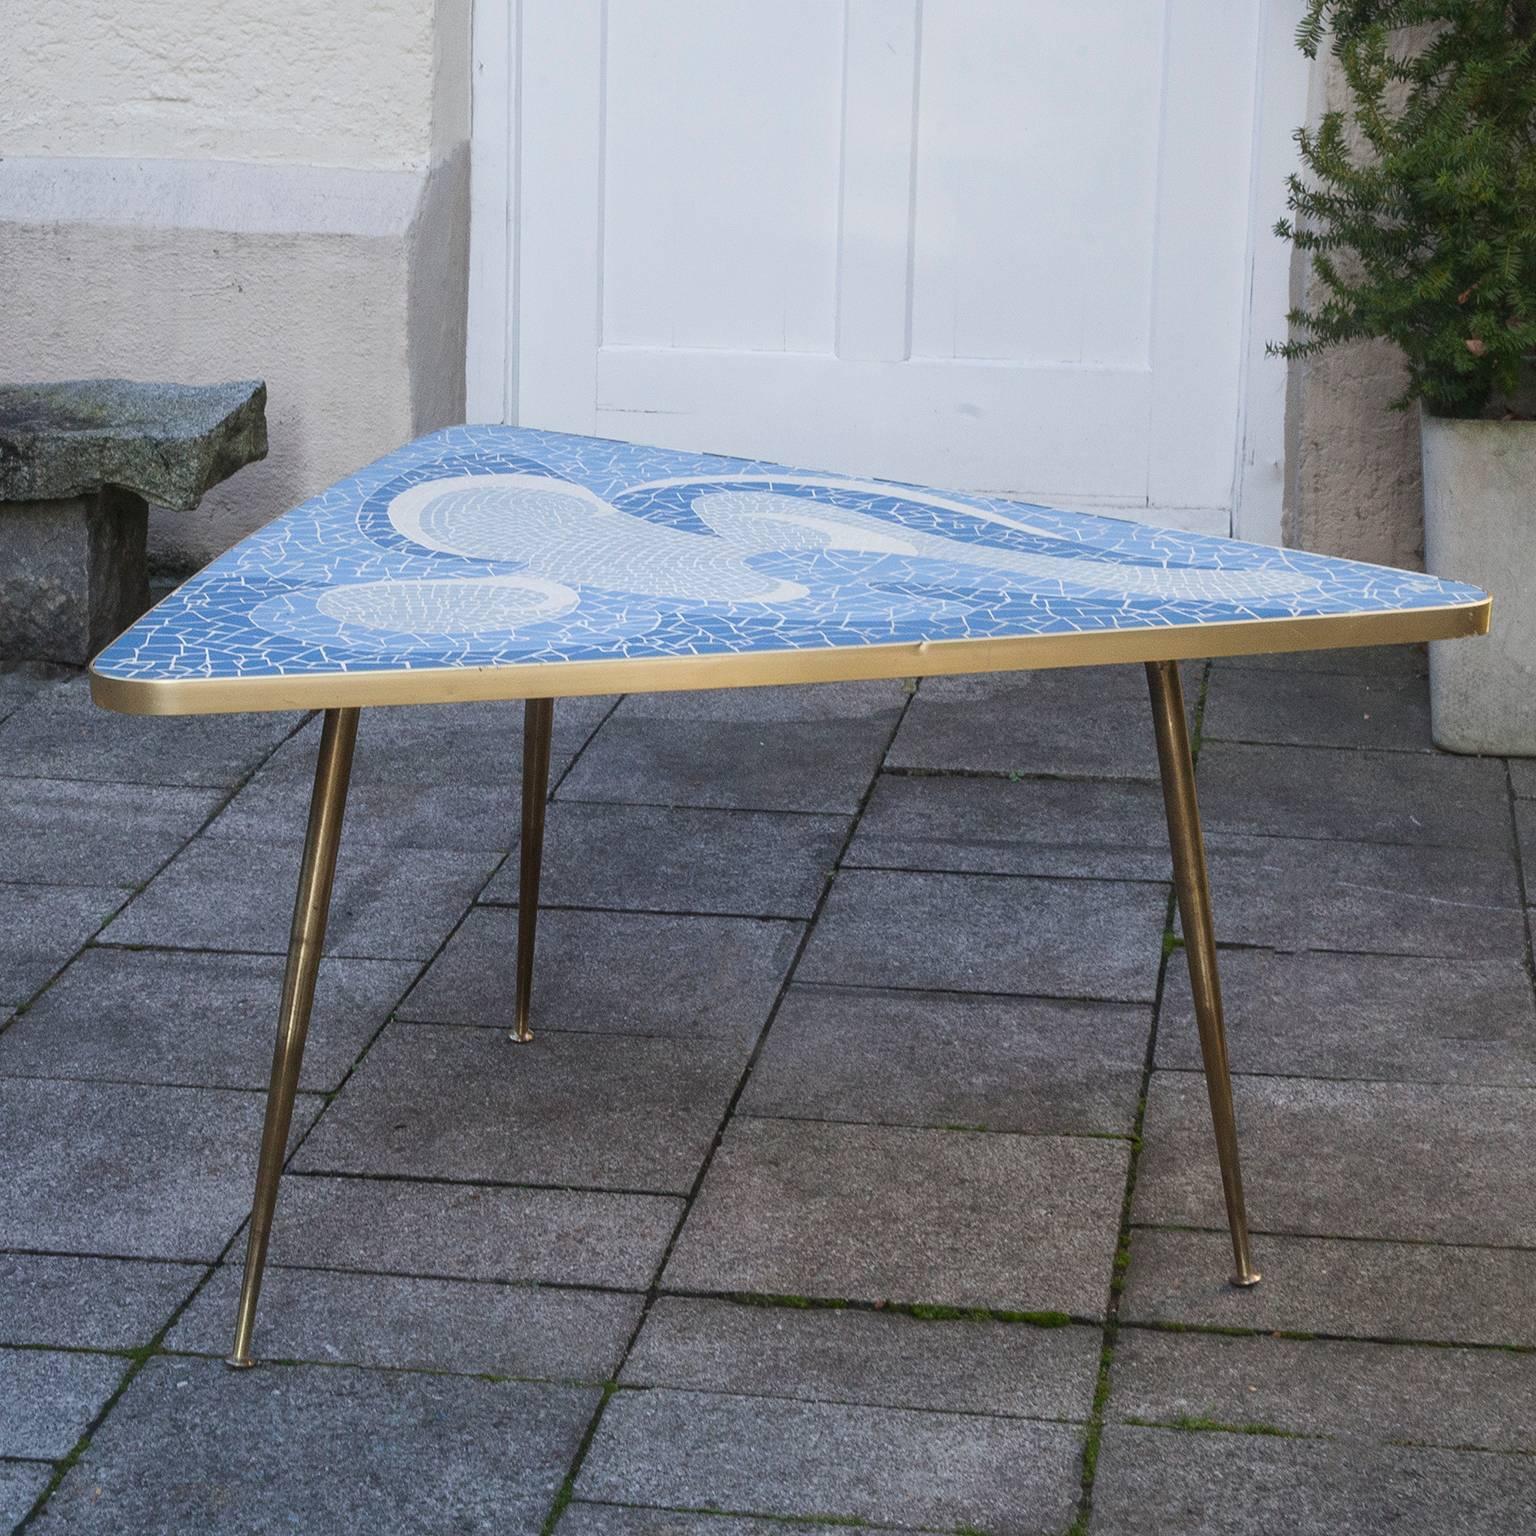 Mosaic triangle tripod coffee table by the German sculptor Berthold Muller, Oerlinghausen (1893-1979). The table has a triangle shaped tabletop and a beautiful mosaic pattern of stone mosaic tiles and a brass rim and tripod brass legs. The colors of